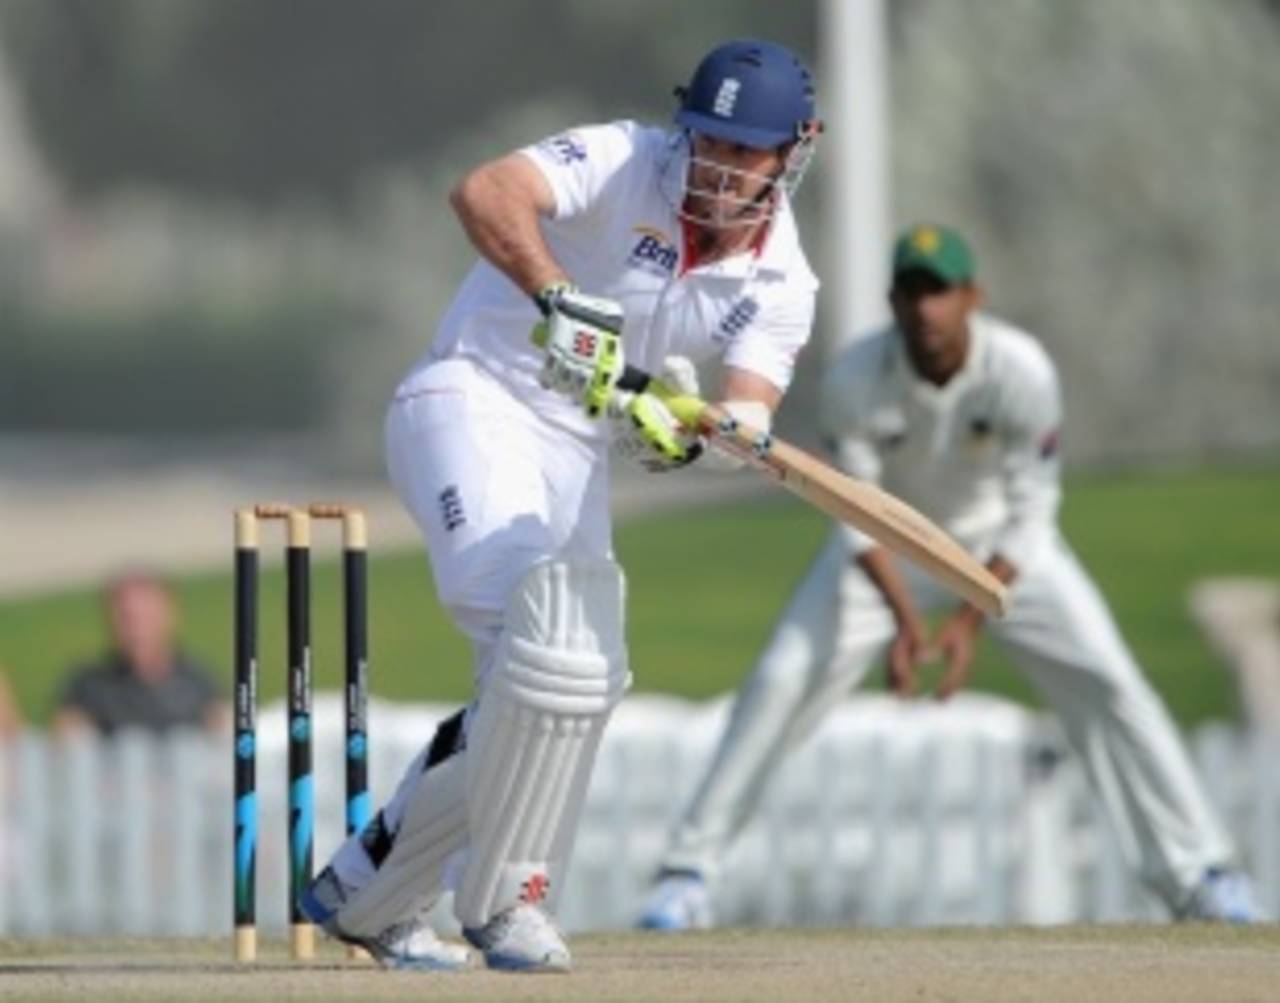 Andrew Strauss scored 62 in the second innings, PCB XI v England XI, tour match, 3rd day, Dubai, January 13, 2012